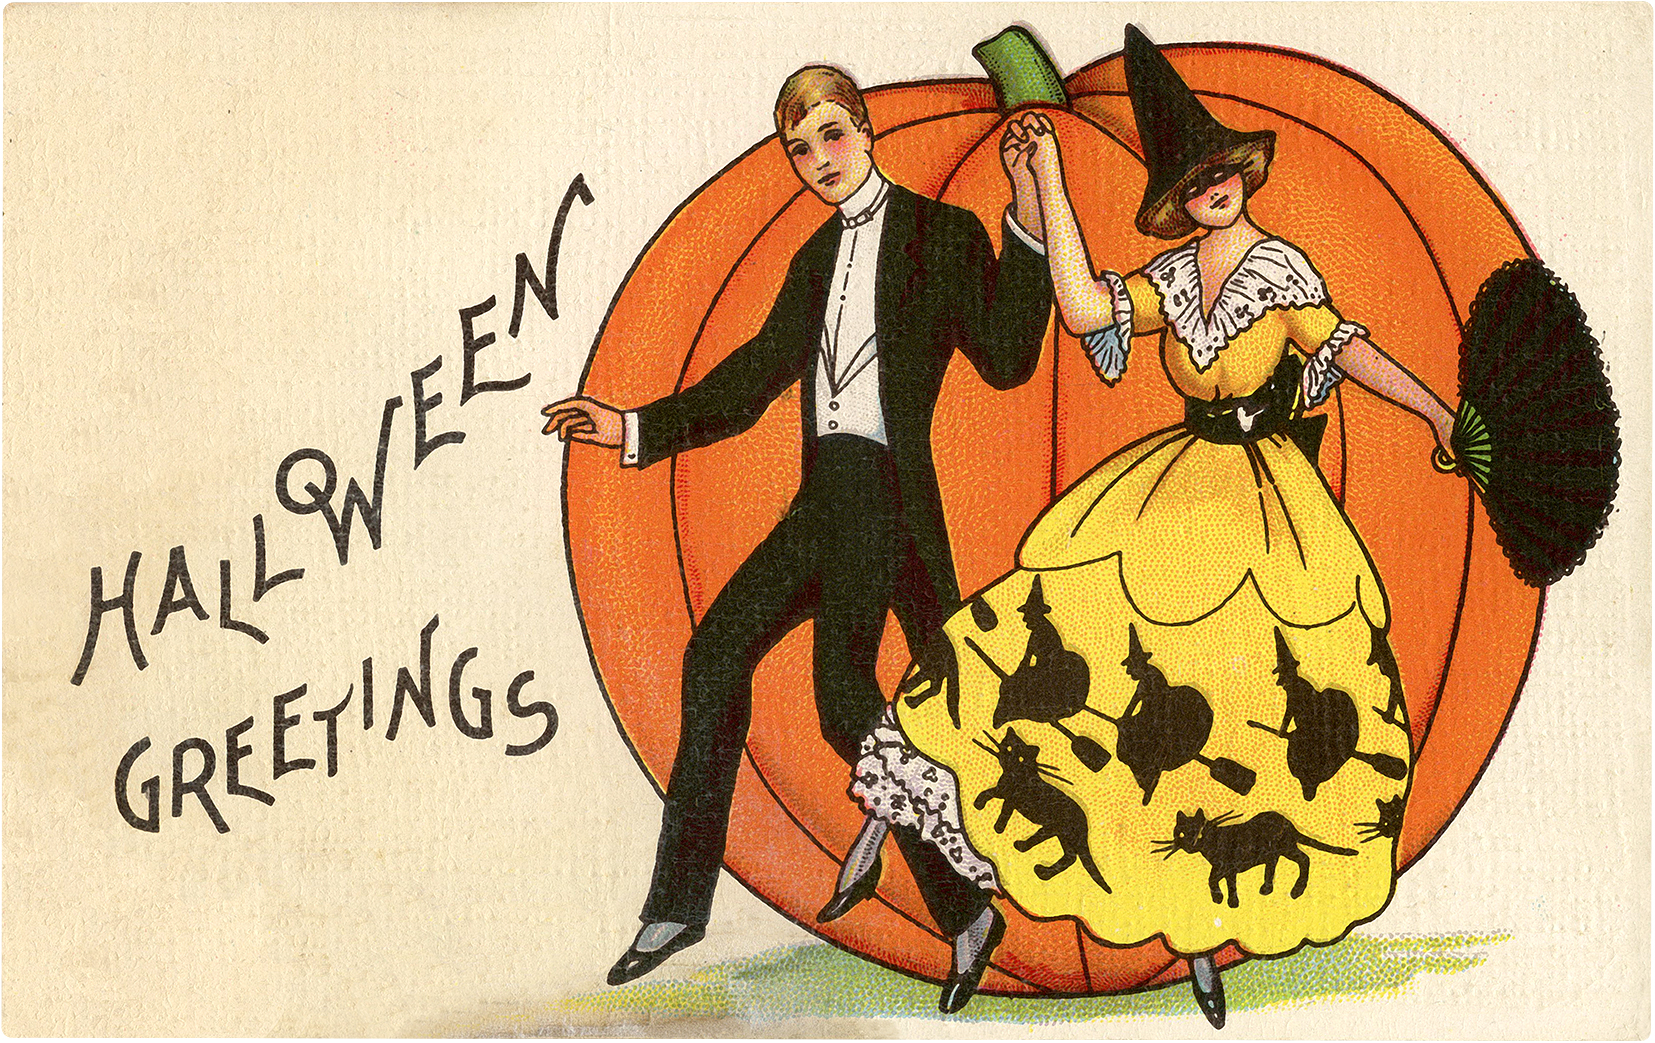 Vintage style image with the words 'halloween greetings' and a graphic of a man and woman holding h ands and wearing halloween themed formal attire. The man wears a simple tux with no bow tie. the woman wears a yellow ball gown, witch's hat and black eye mask. The hem of her dress has a pattern: silhouette of witches in flight. She is holding a black fan. There is a large pumpkin in the background 